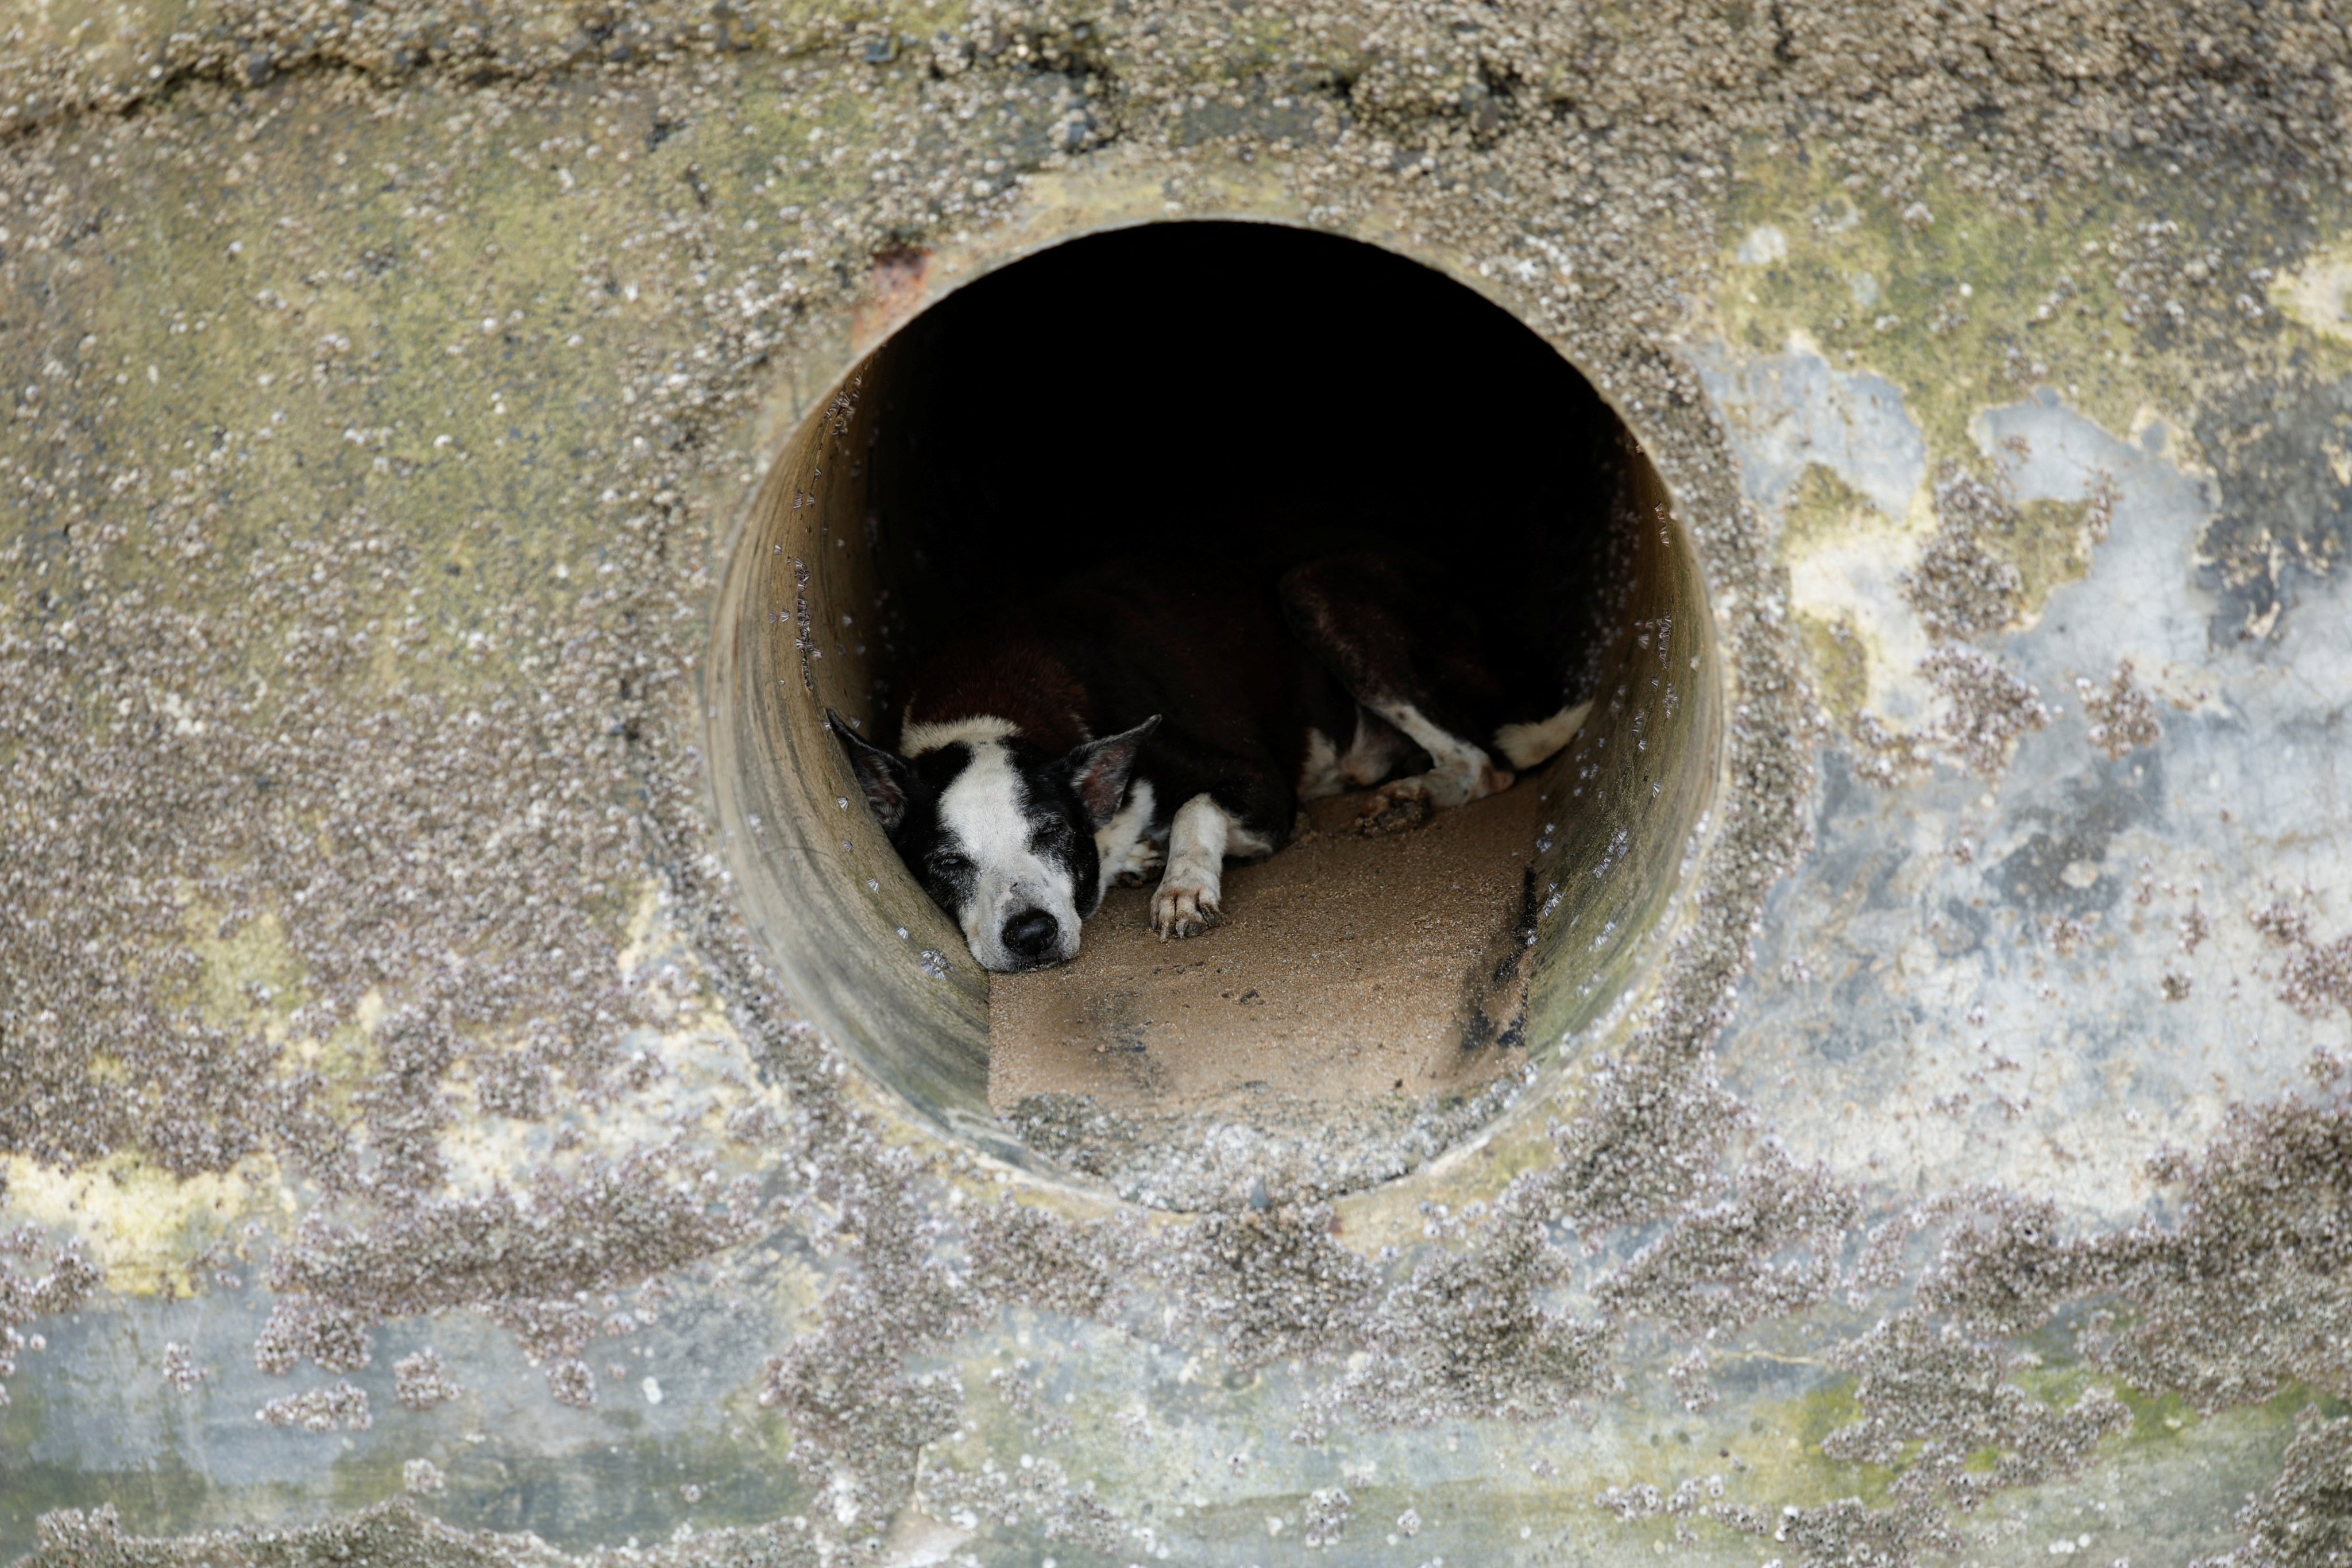 A dog sleeps in an open drain on a hot day in Mumbai. Photo: Reuters